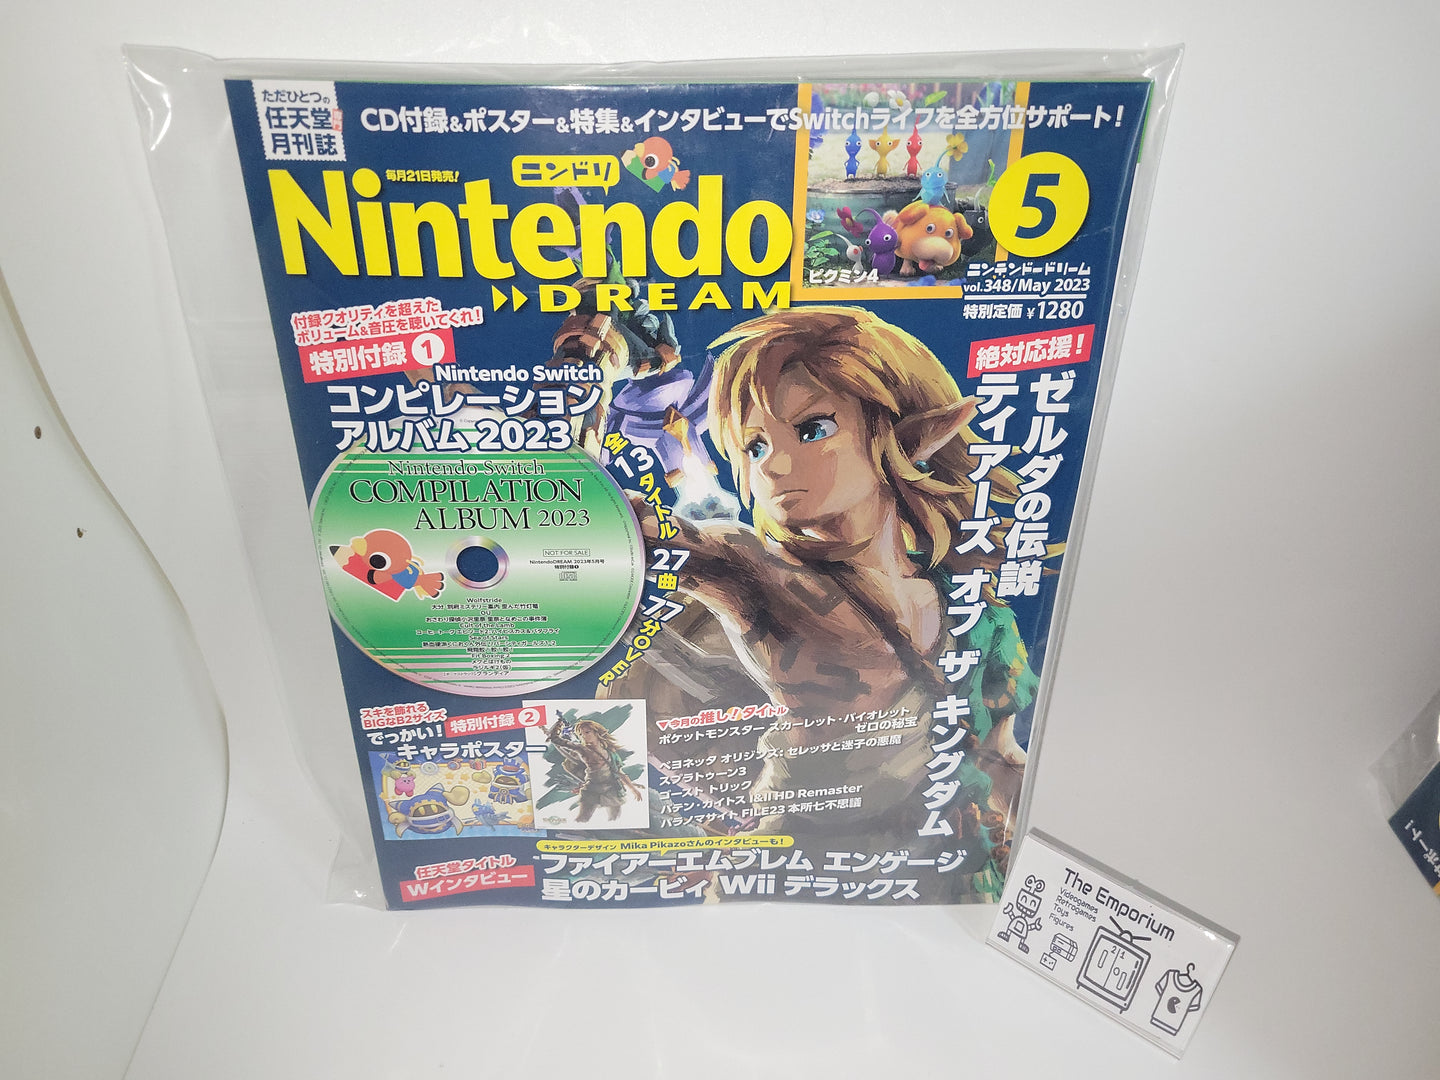 Nintendo Dream magazine with music cd and poster  - book